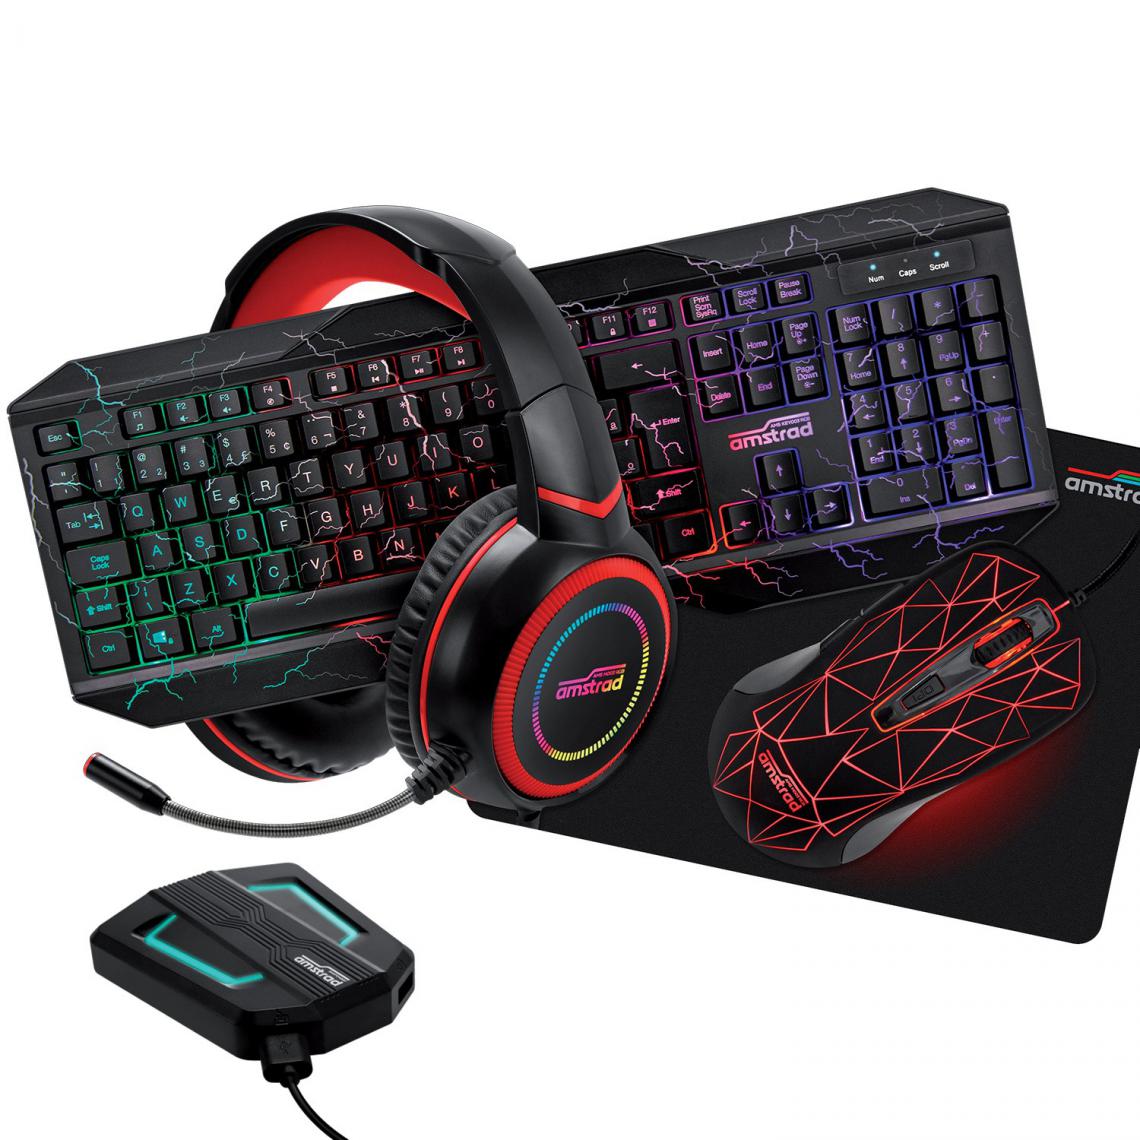 Amstrad - Pack Pro Gamer AMSTRAD HUNTERS-SWITCH007: Clavier, Souris, tapis, Casque & convertisseur PC - PS3/4 - XBOX 360/ONE/S/X - SWITCH - Souris